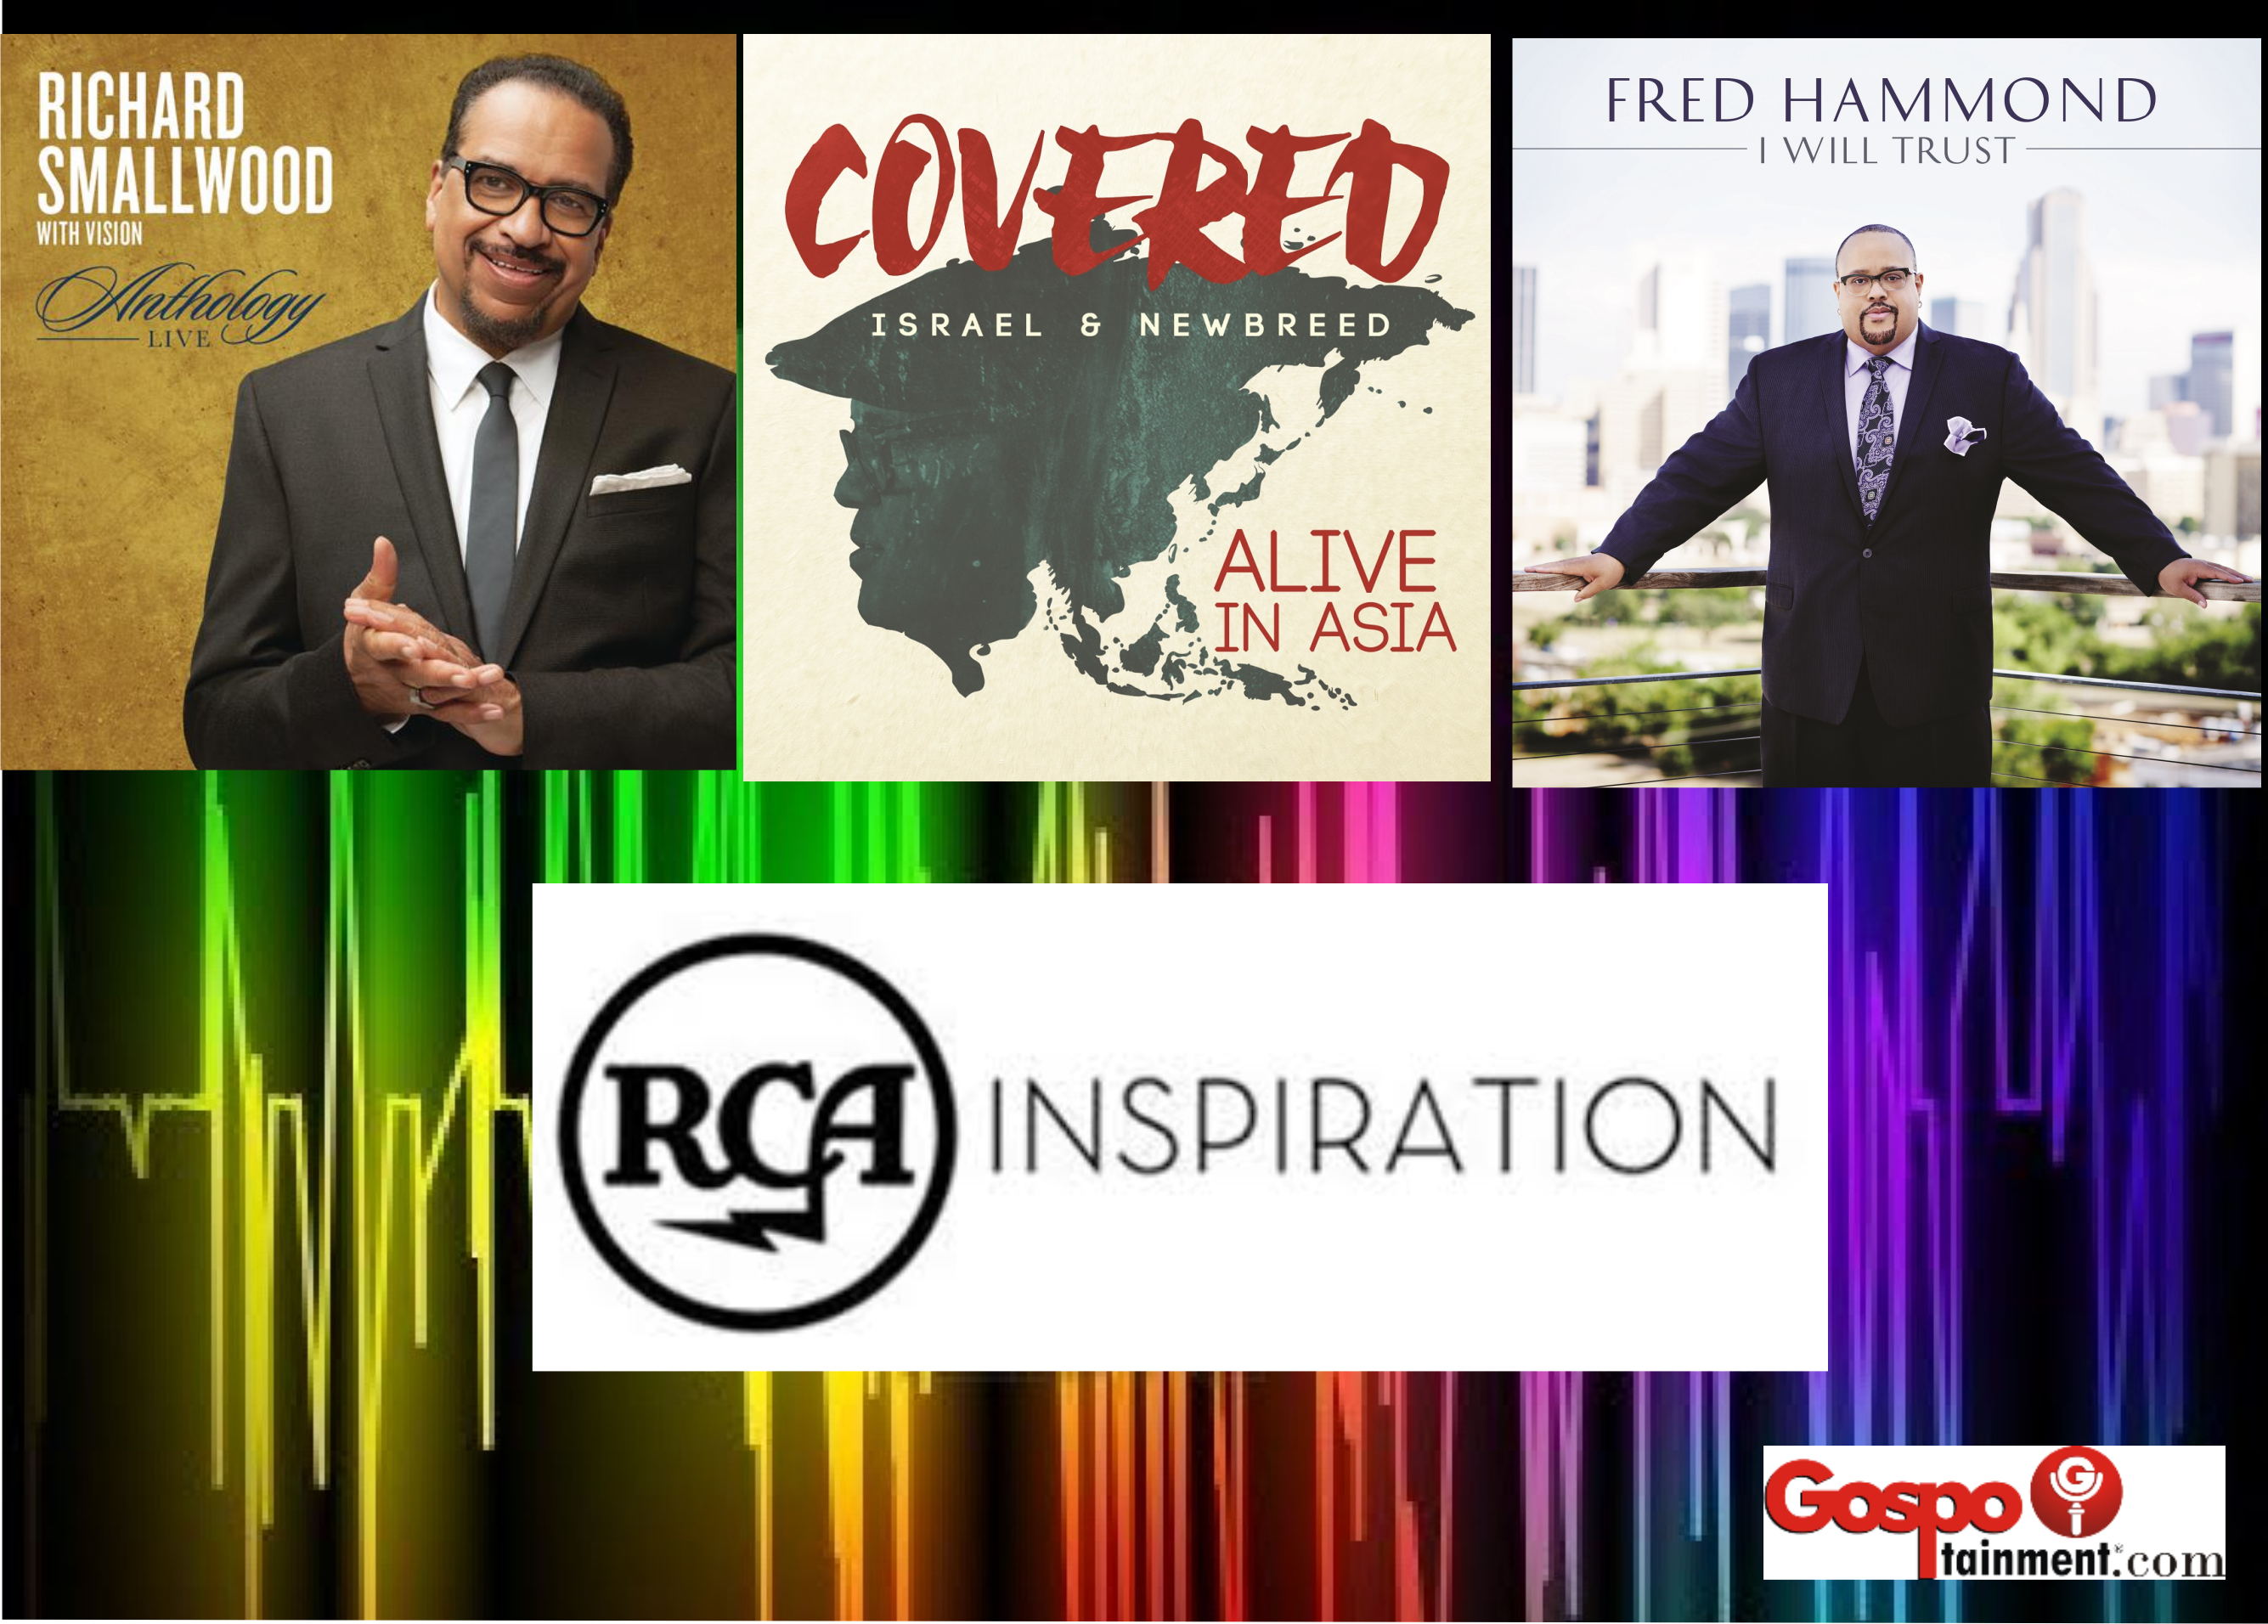 RCA INSPIRATION RECEIVES NOMINATIONS FOR 2017 NAACP IMAGE AWARDS 9